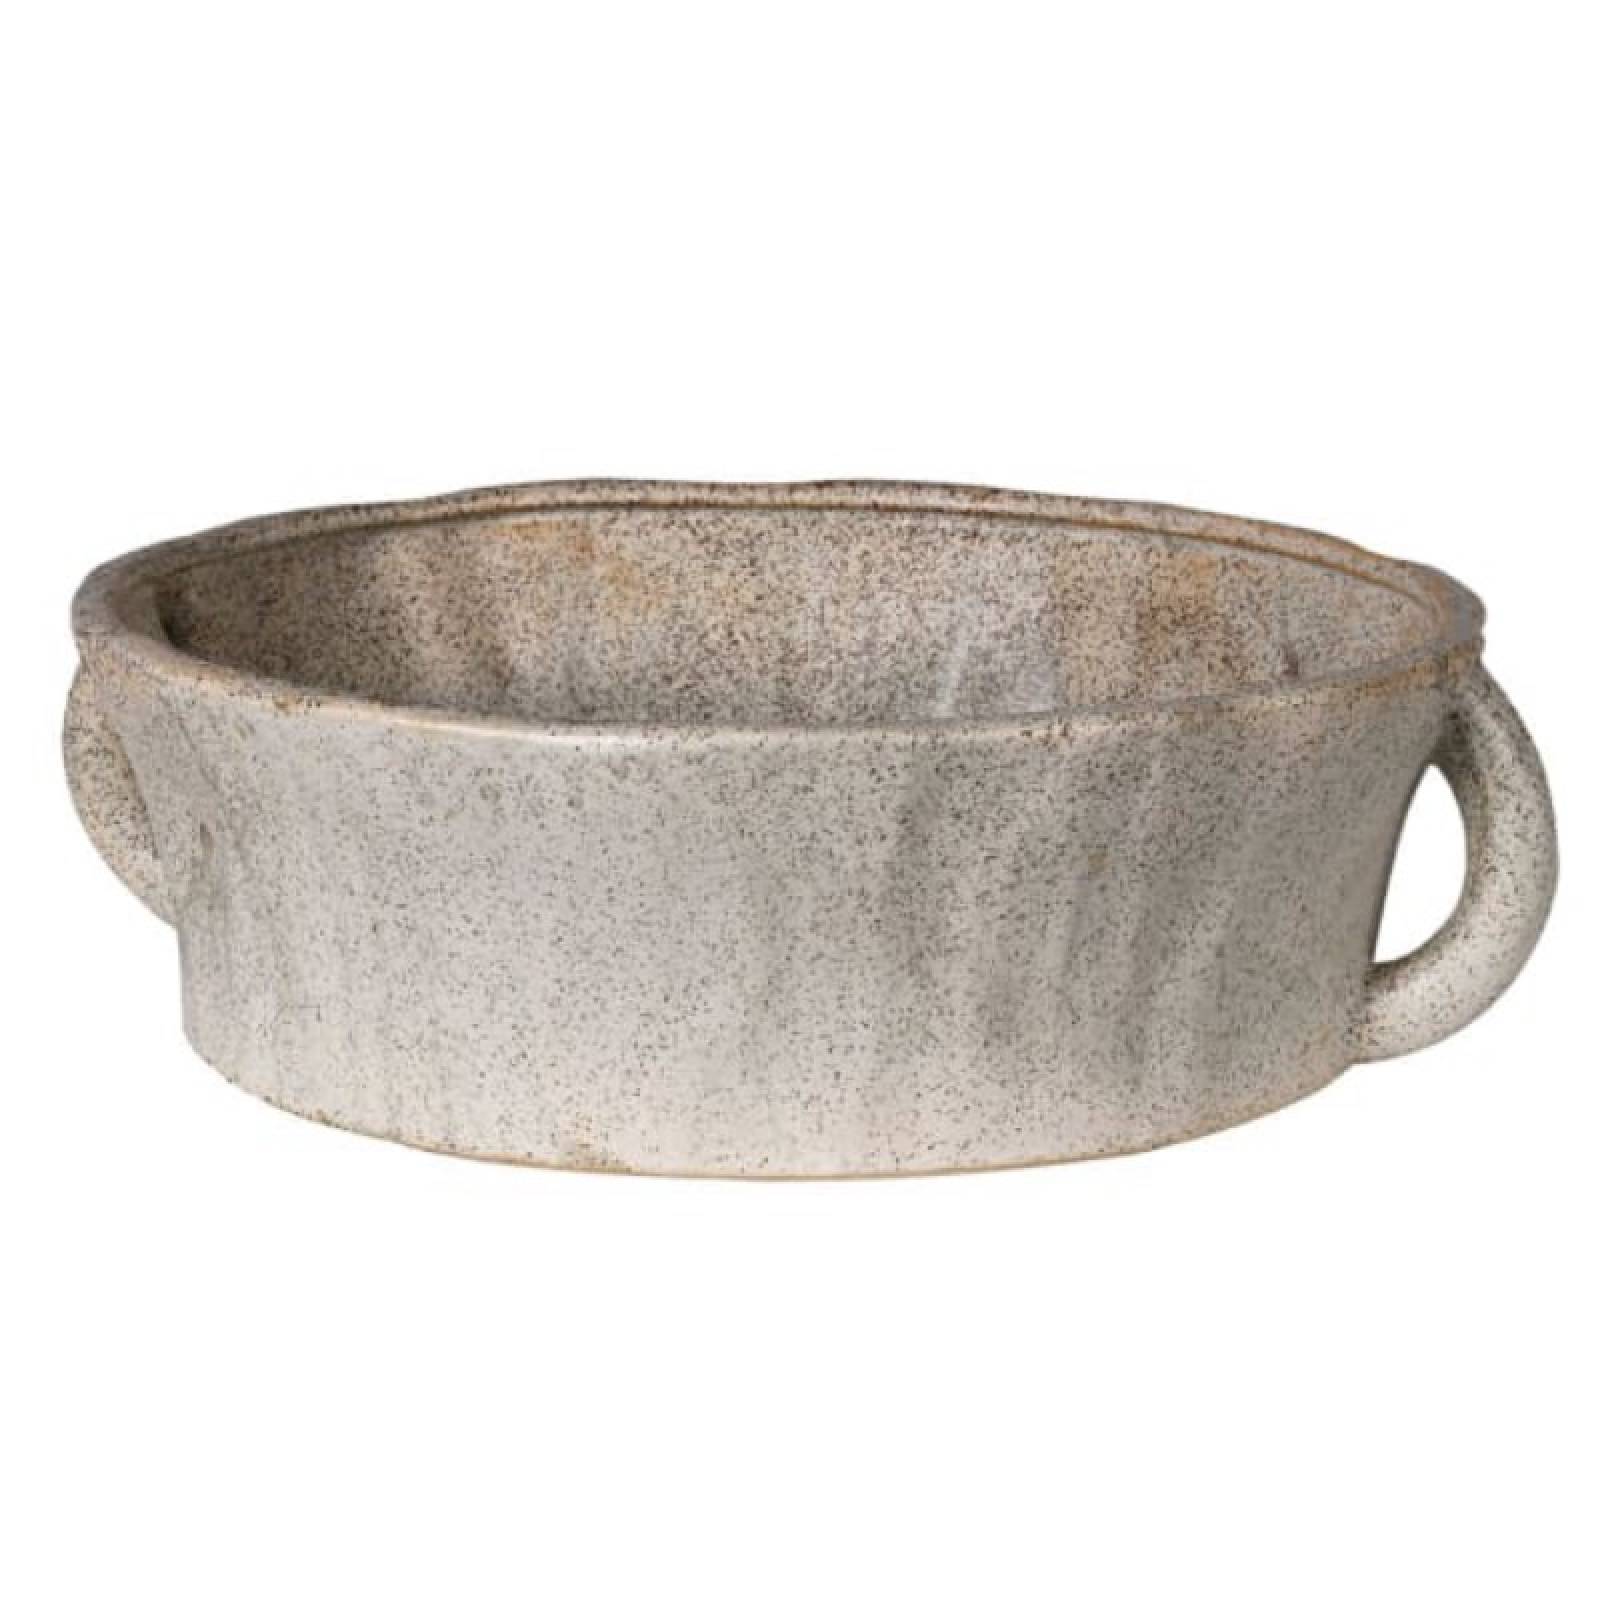 Brown Speckled Ceramic Pot Bowl With Handles